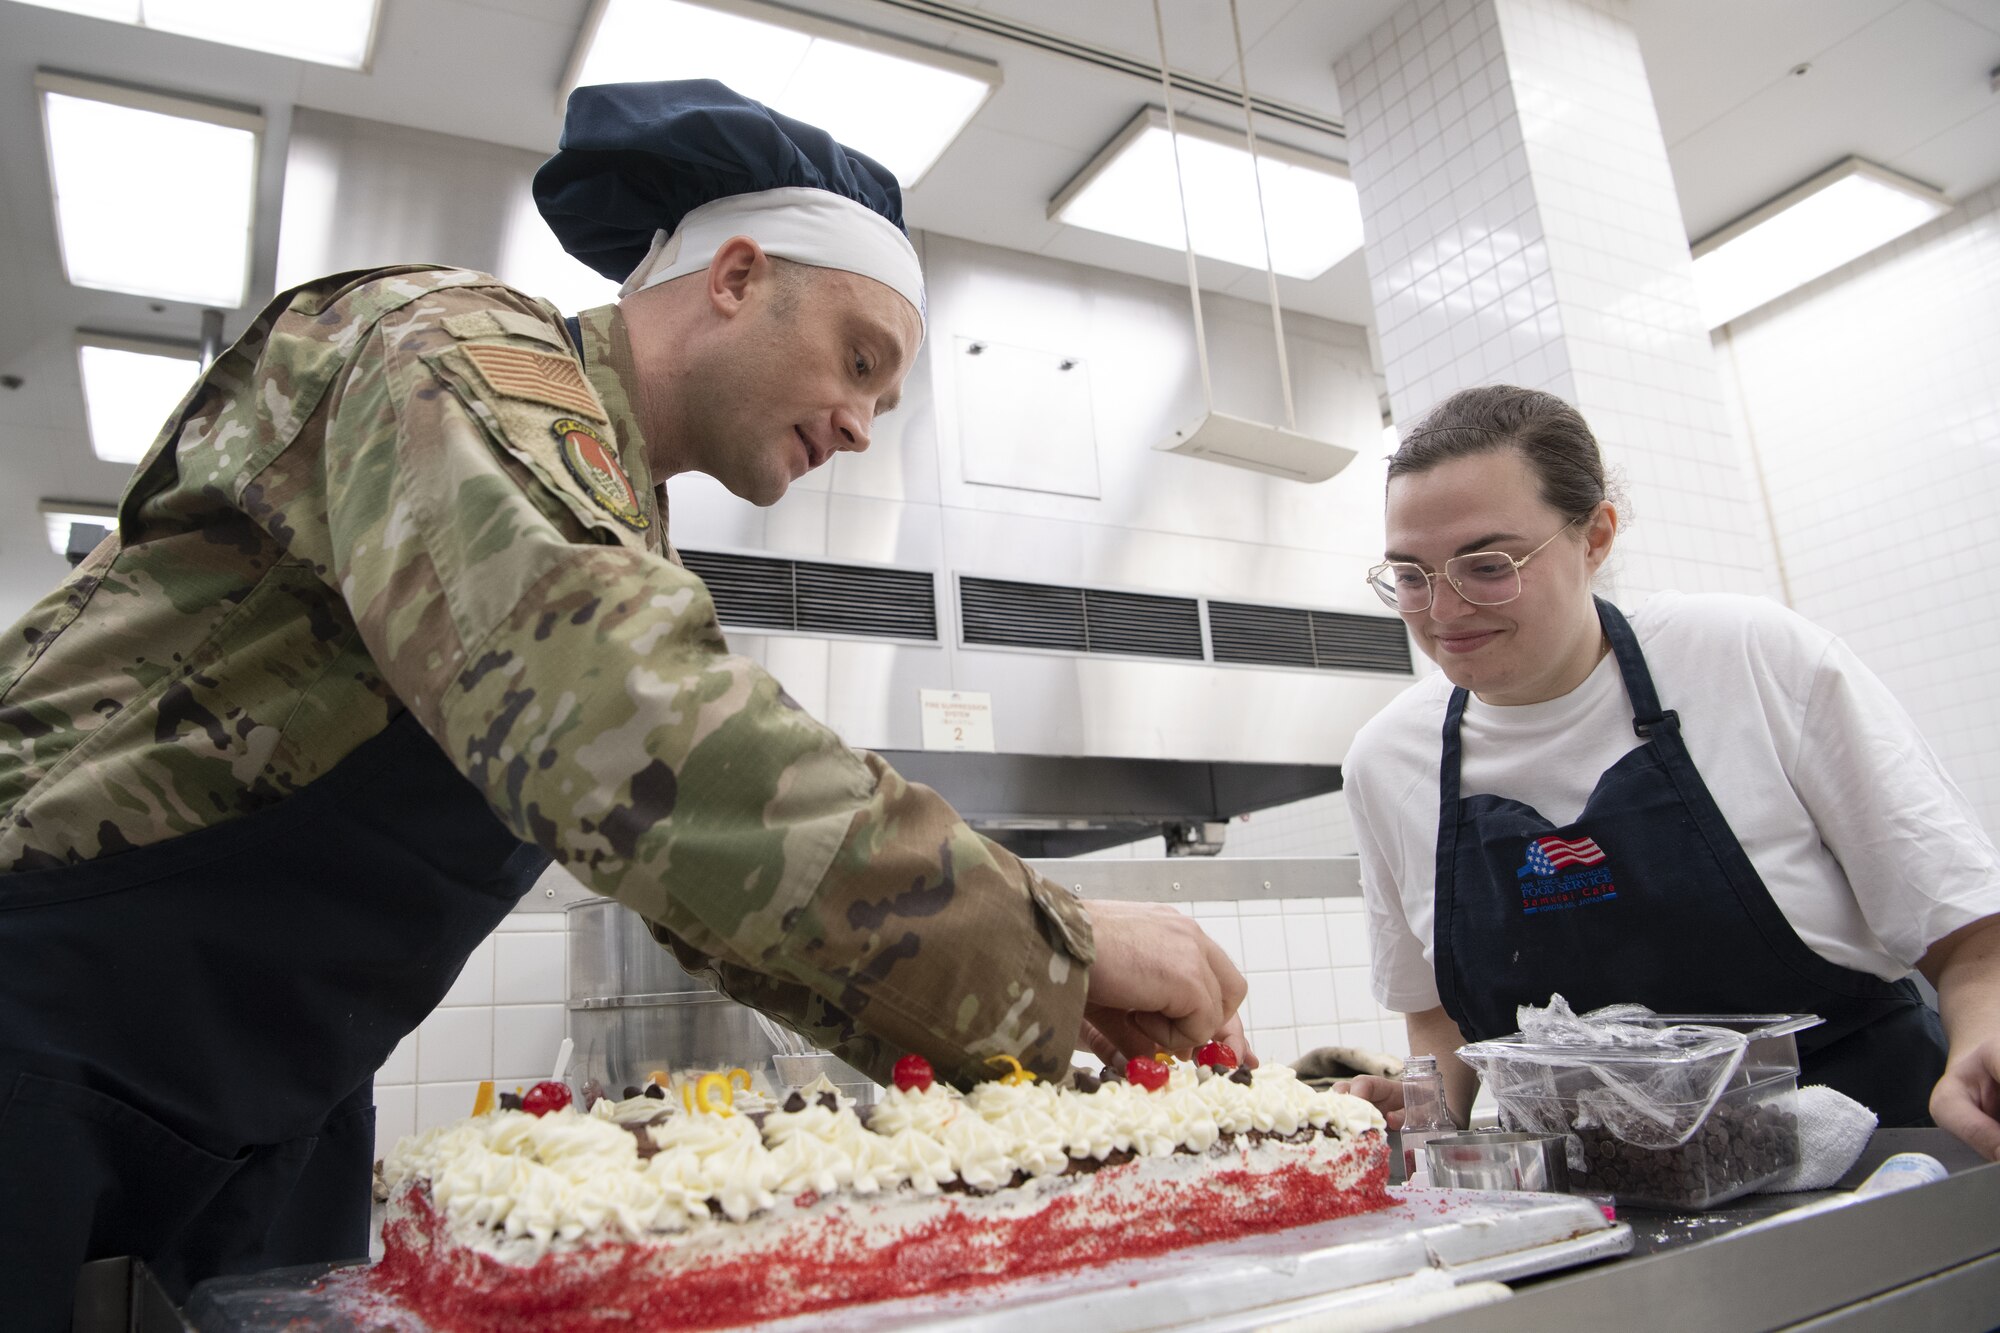 Lt. Col. Jordan Hayes, 374th Force Support Squadron commander, and Staff Sgt. Kylee Masters Thomas, 374th FSS food service shift leader, decorate a cake in preparation to serve Thanksgiving meals at the Samurai Café Dining Facility at Yokota Air Base, Japan, Nov. 24, 2022. U.S. Ambassador to Japan Rahm Emanuel, U.S. Air Force Lt. Gen. Ricky Rupp, Commander of U.S. Forces Japan and Fifth Air Force, and 374th Airlift Wing leadership took time to serve and celebrate Thanksgiving Day alongside service members and families assigned to Yokota. (U.S. Air Force photo by Tech. Sgt. Christopher Hubenthal)